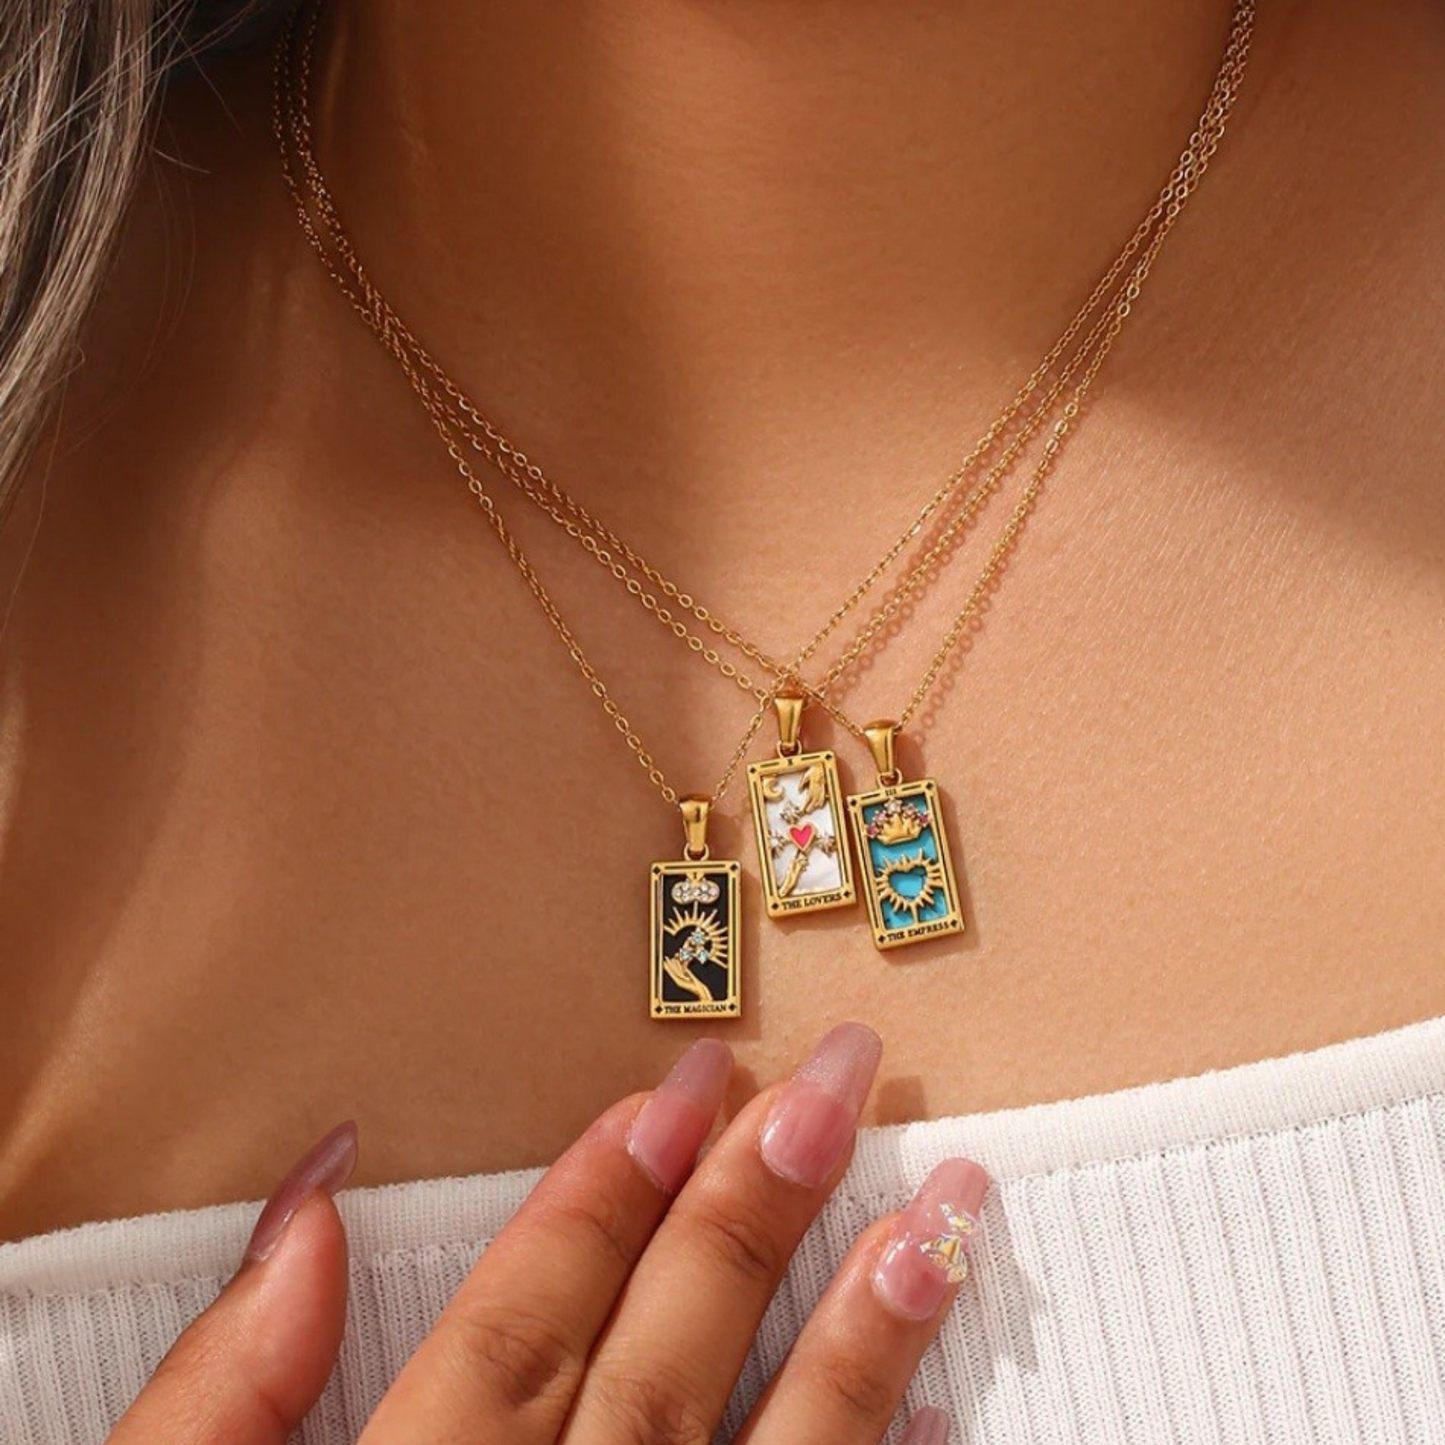 The Lovers 18K Gold Plated Tarot Card Necklace